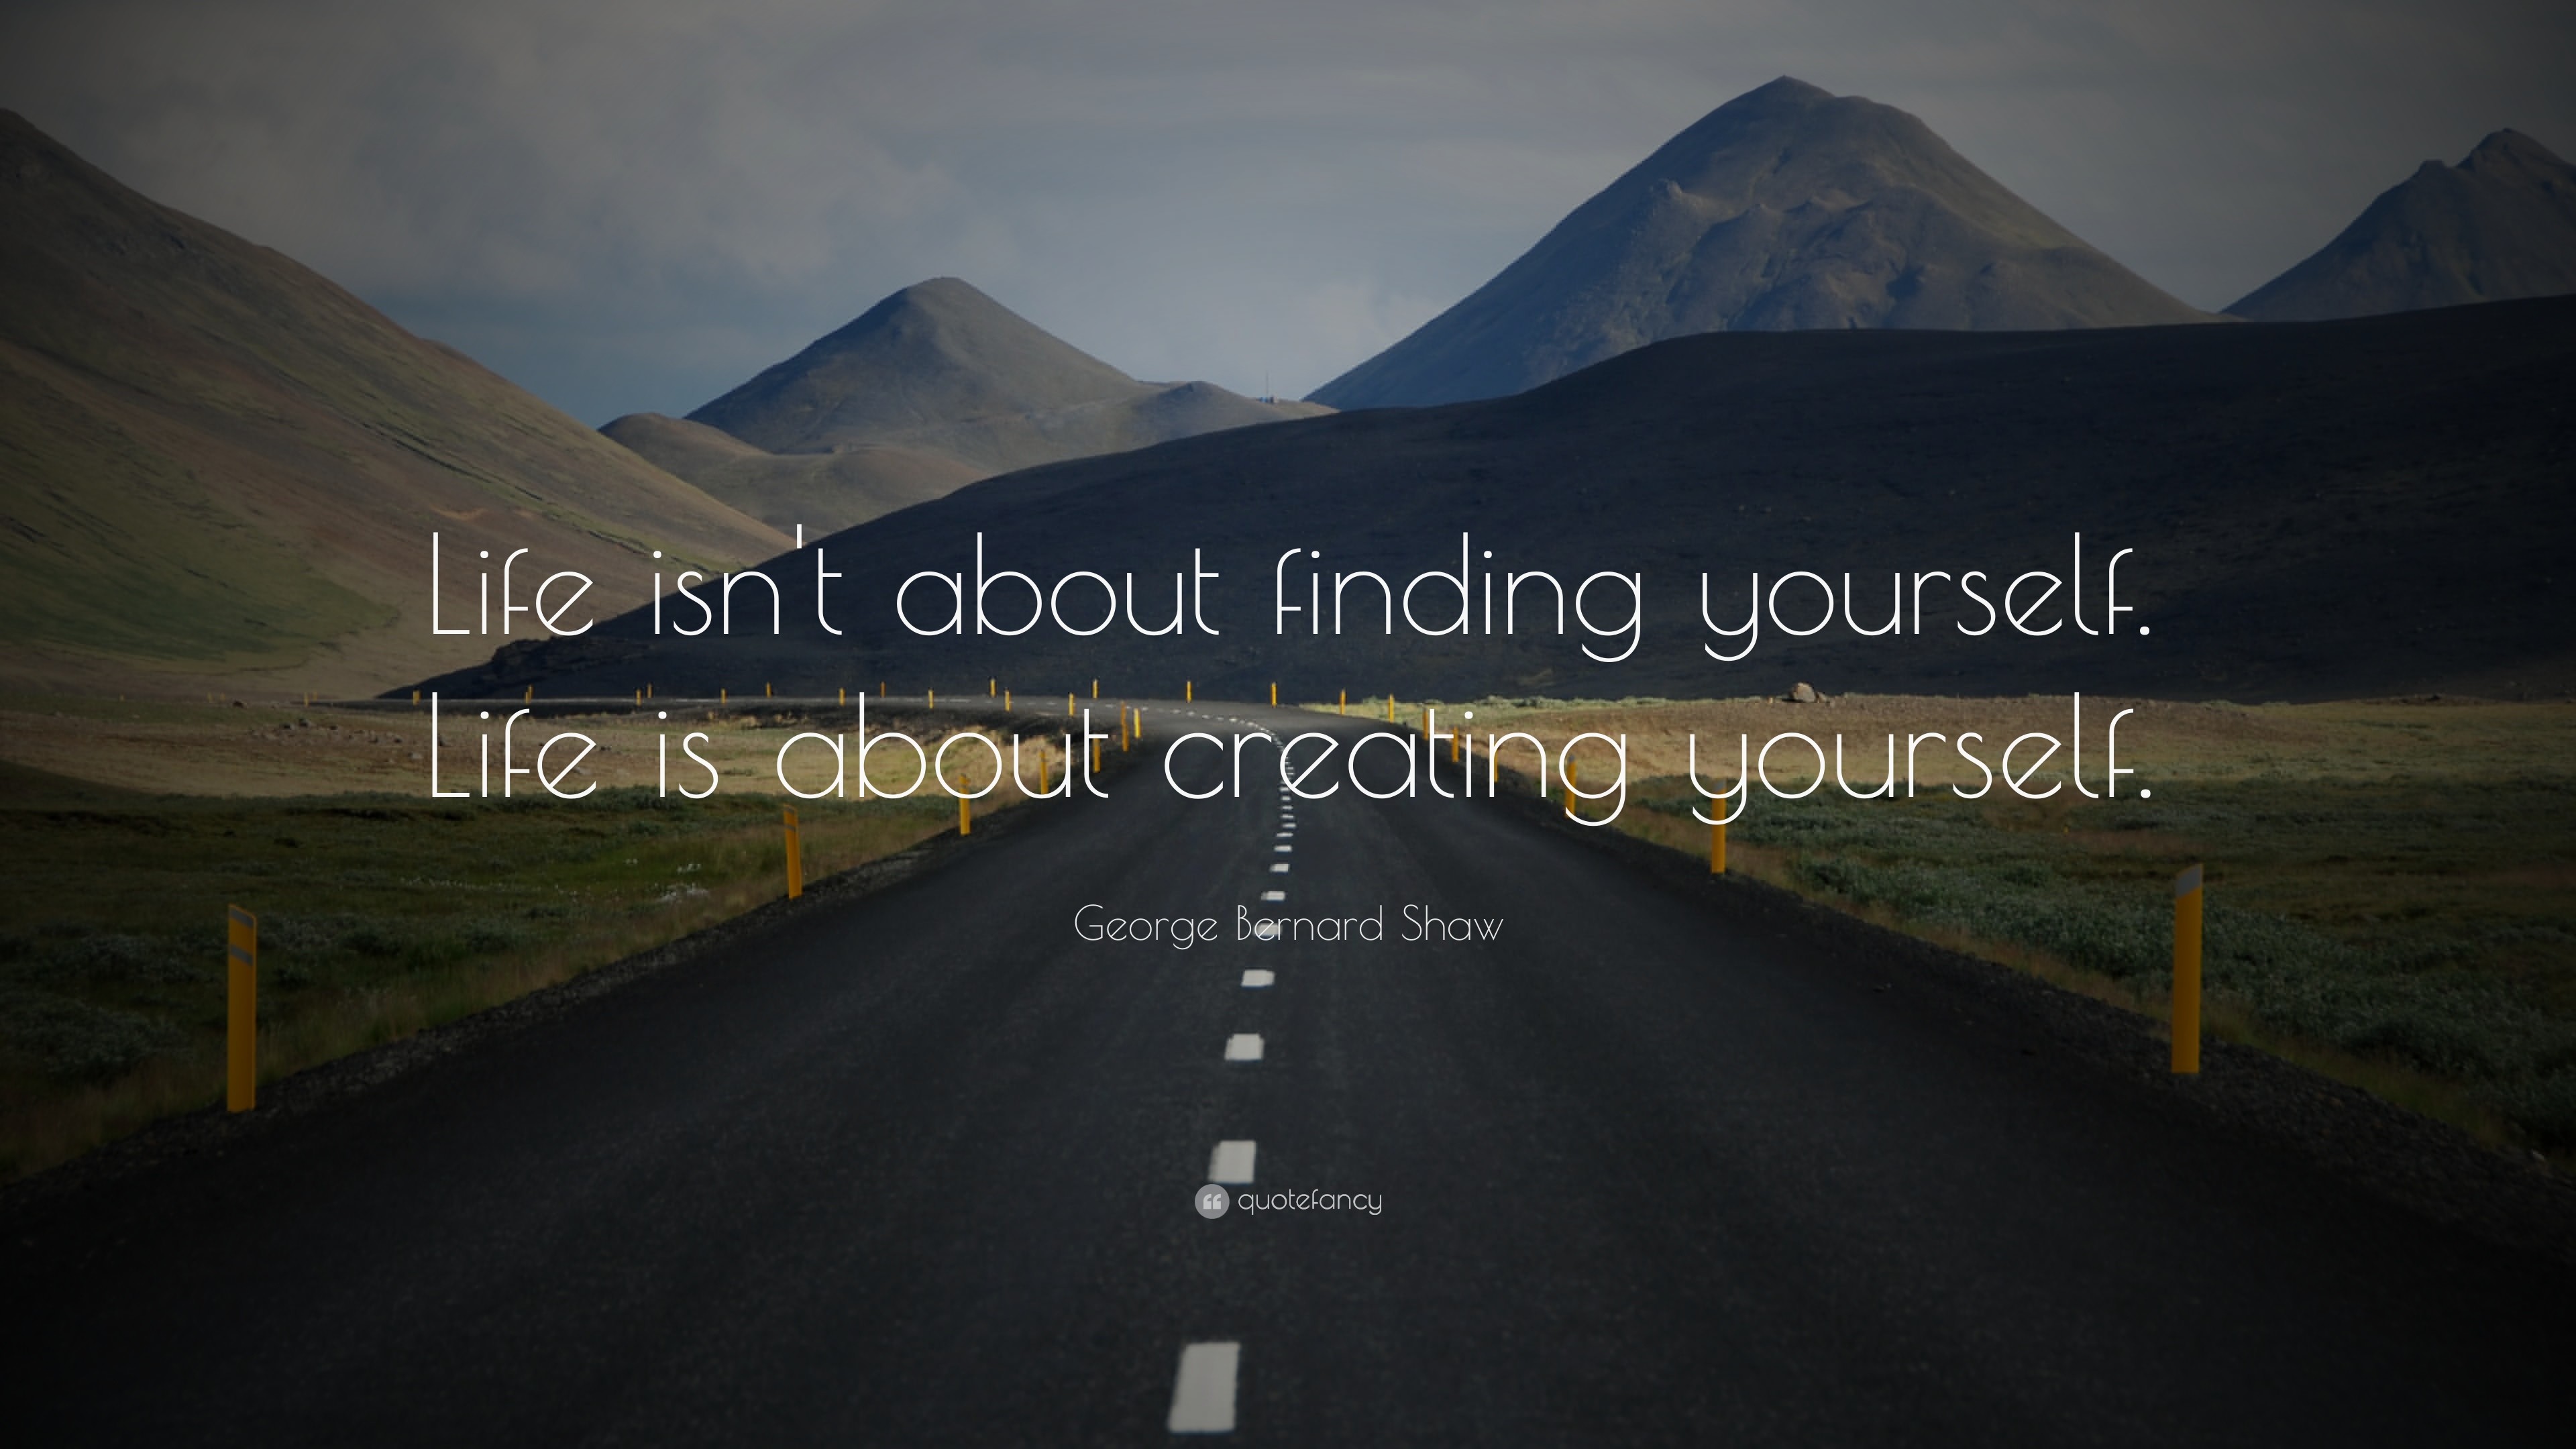 3840x2160 Life Quotes: “Life isn't about finding yourself. Life is about creating